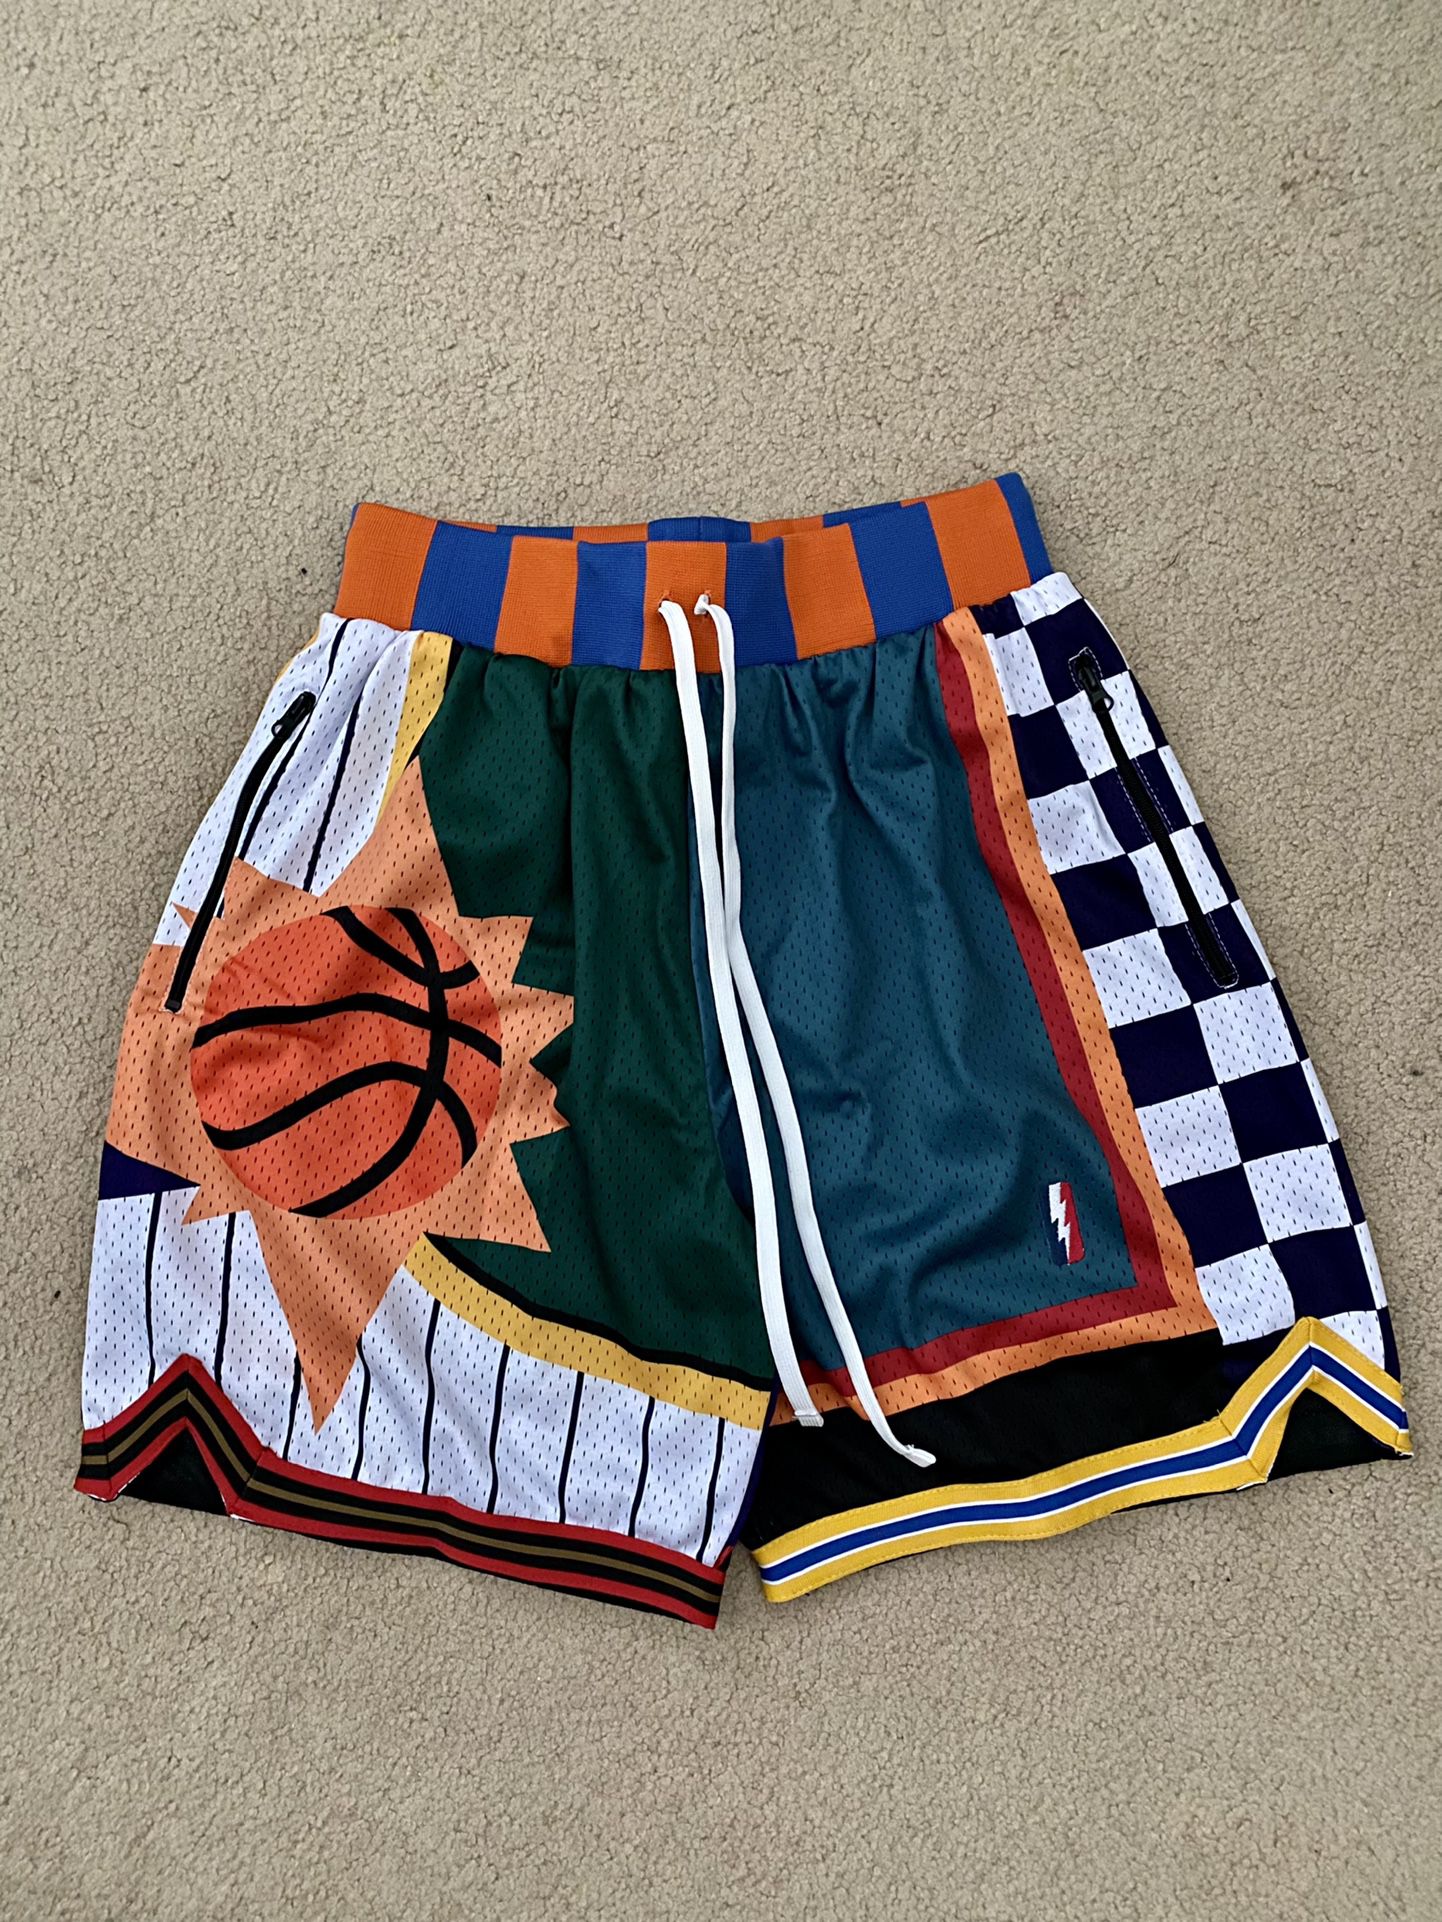 Collect and Select Who Cares What The PT.2 basketball hoop shorts for Sale  in Antioch, CA - OfferUp